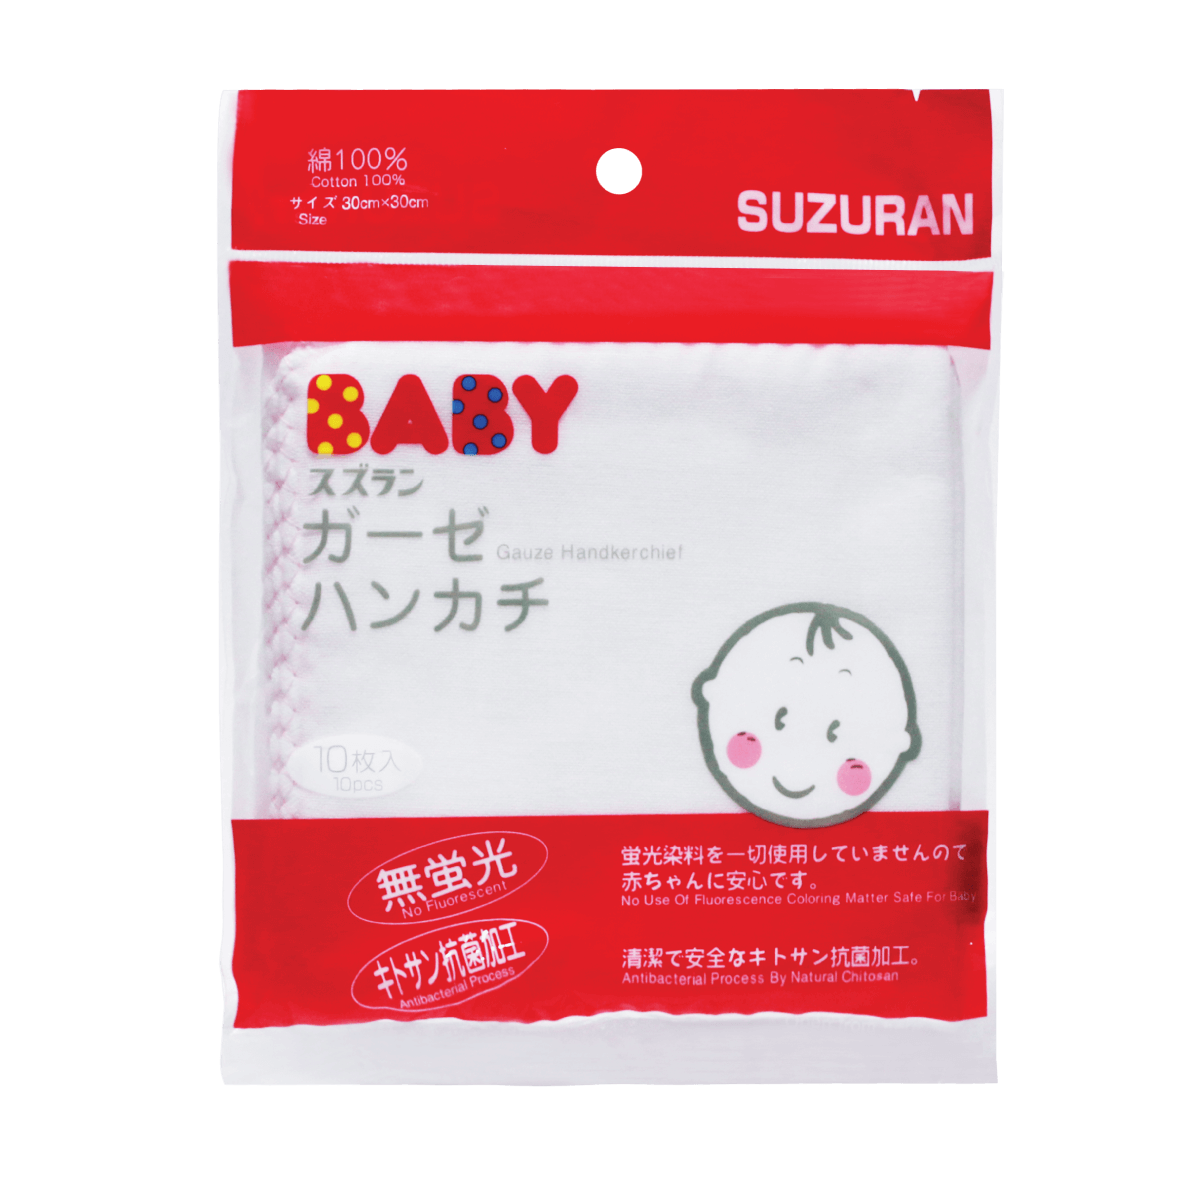 Suzuran Baby Gauze Handkerchief available in 5-piece and 10-piece pack.